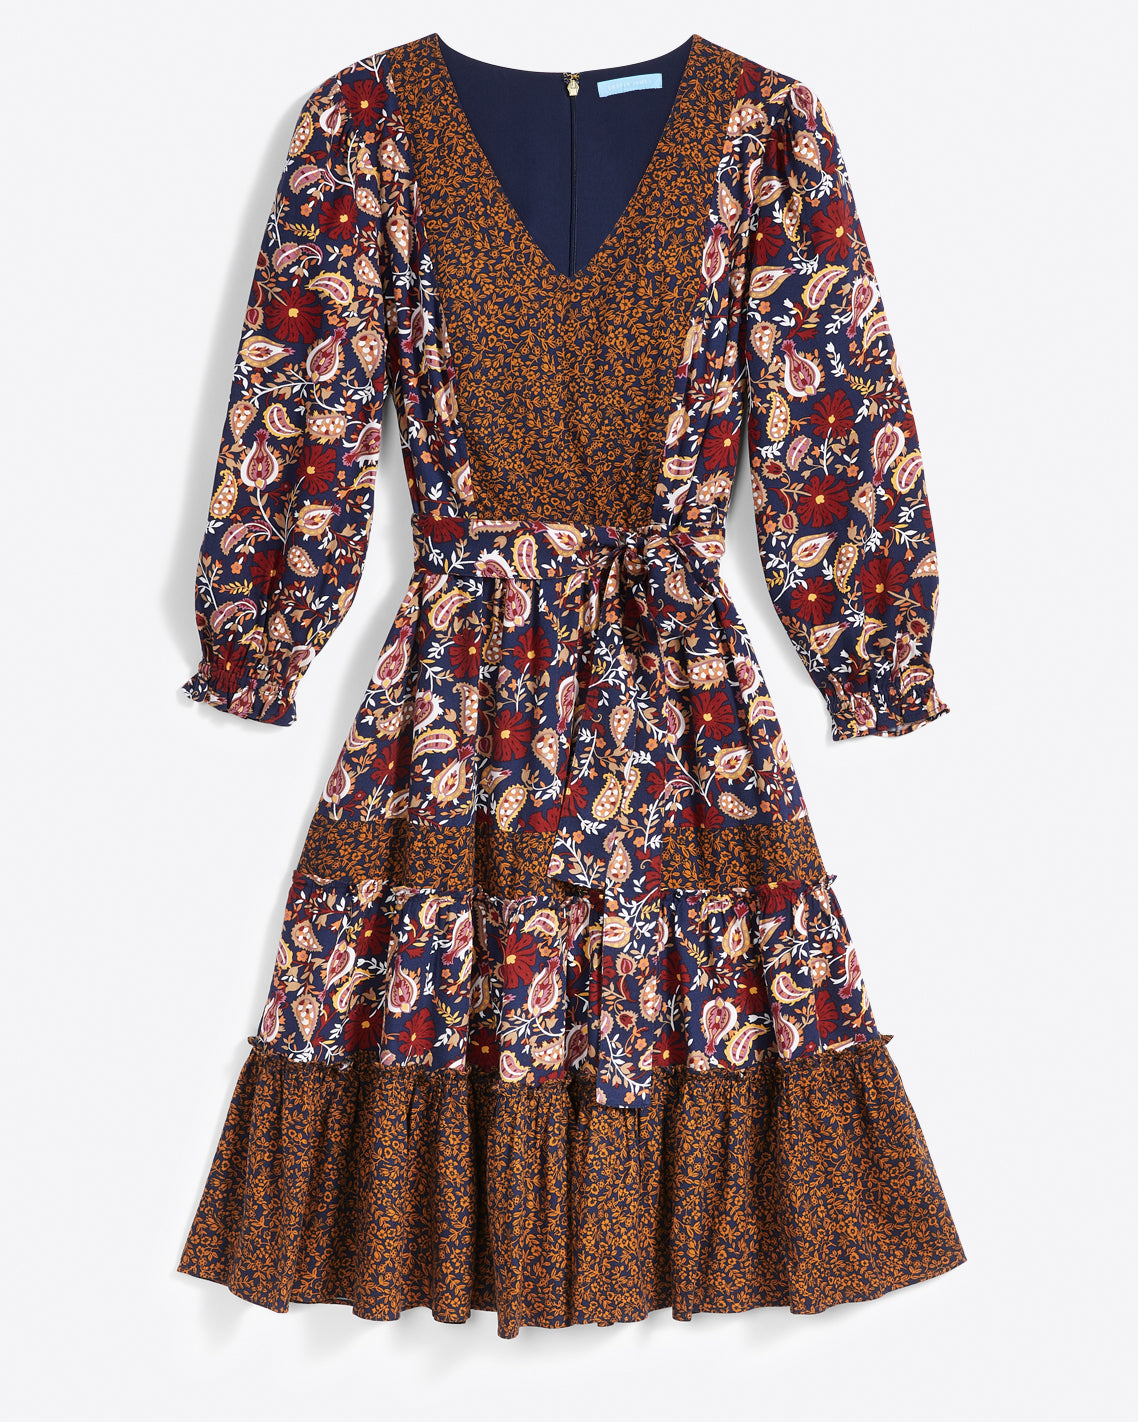 Fit & Flare Midi Dress in Fall Paisley